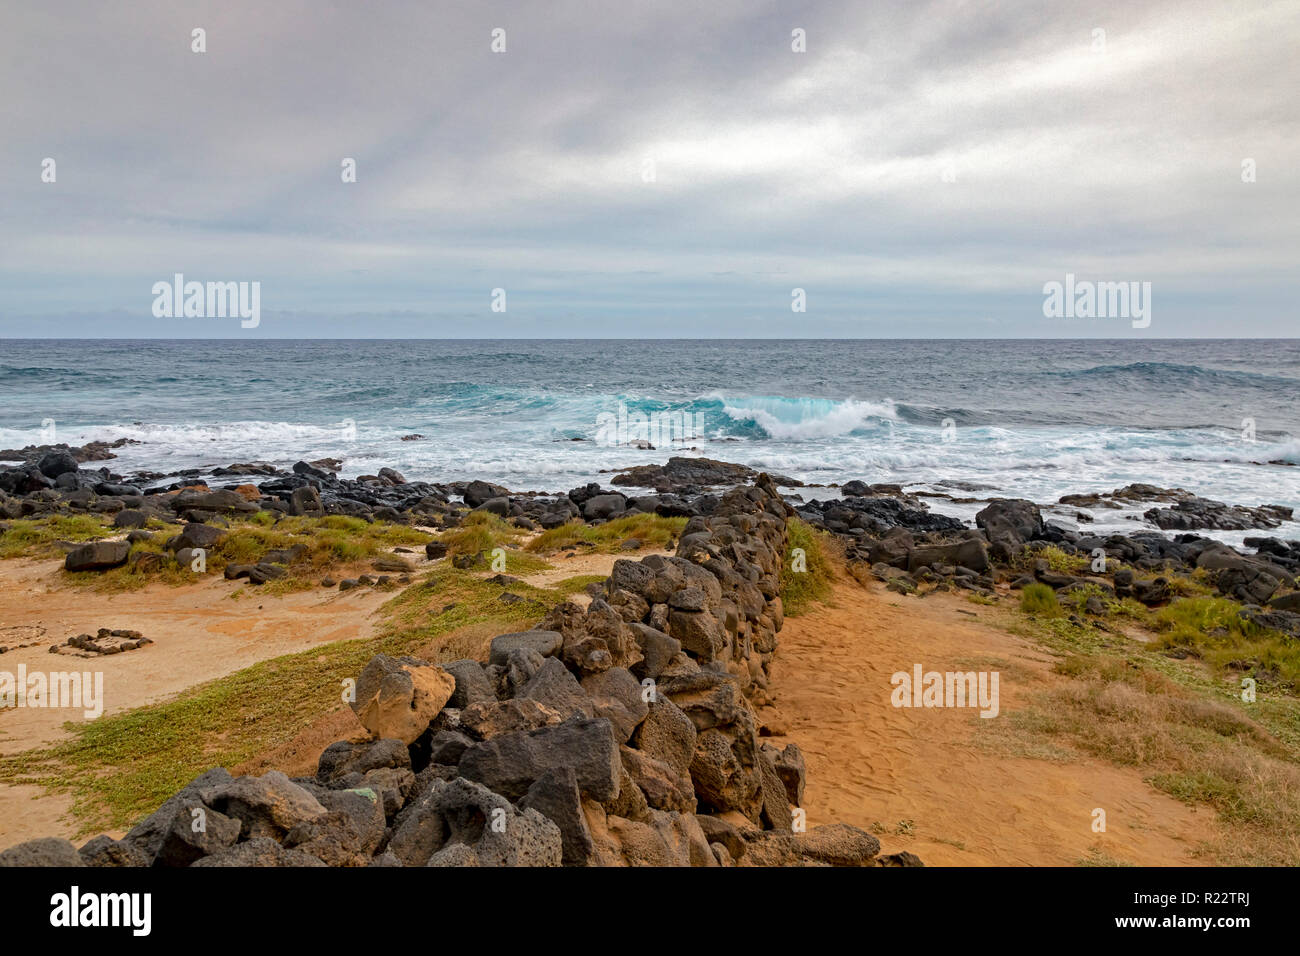 Ka Lae, Hawaii - A stone wall leads to the Pacific Ocean at the southernmost point in the United States, also called South Point, on Hawaii's Big Isla Stock Photo